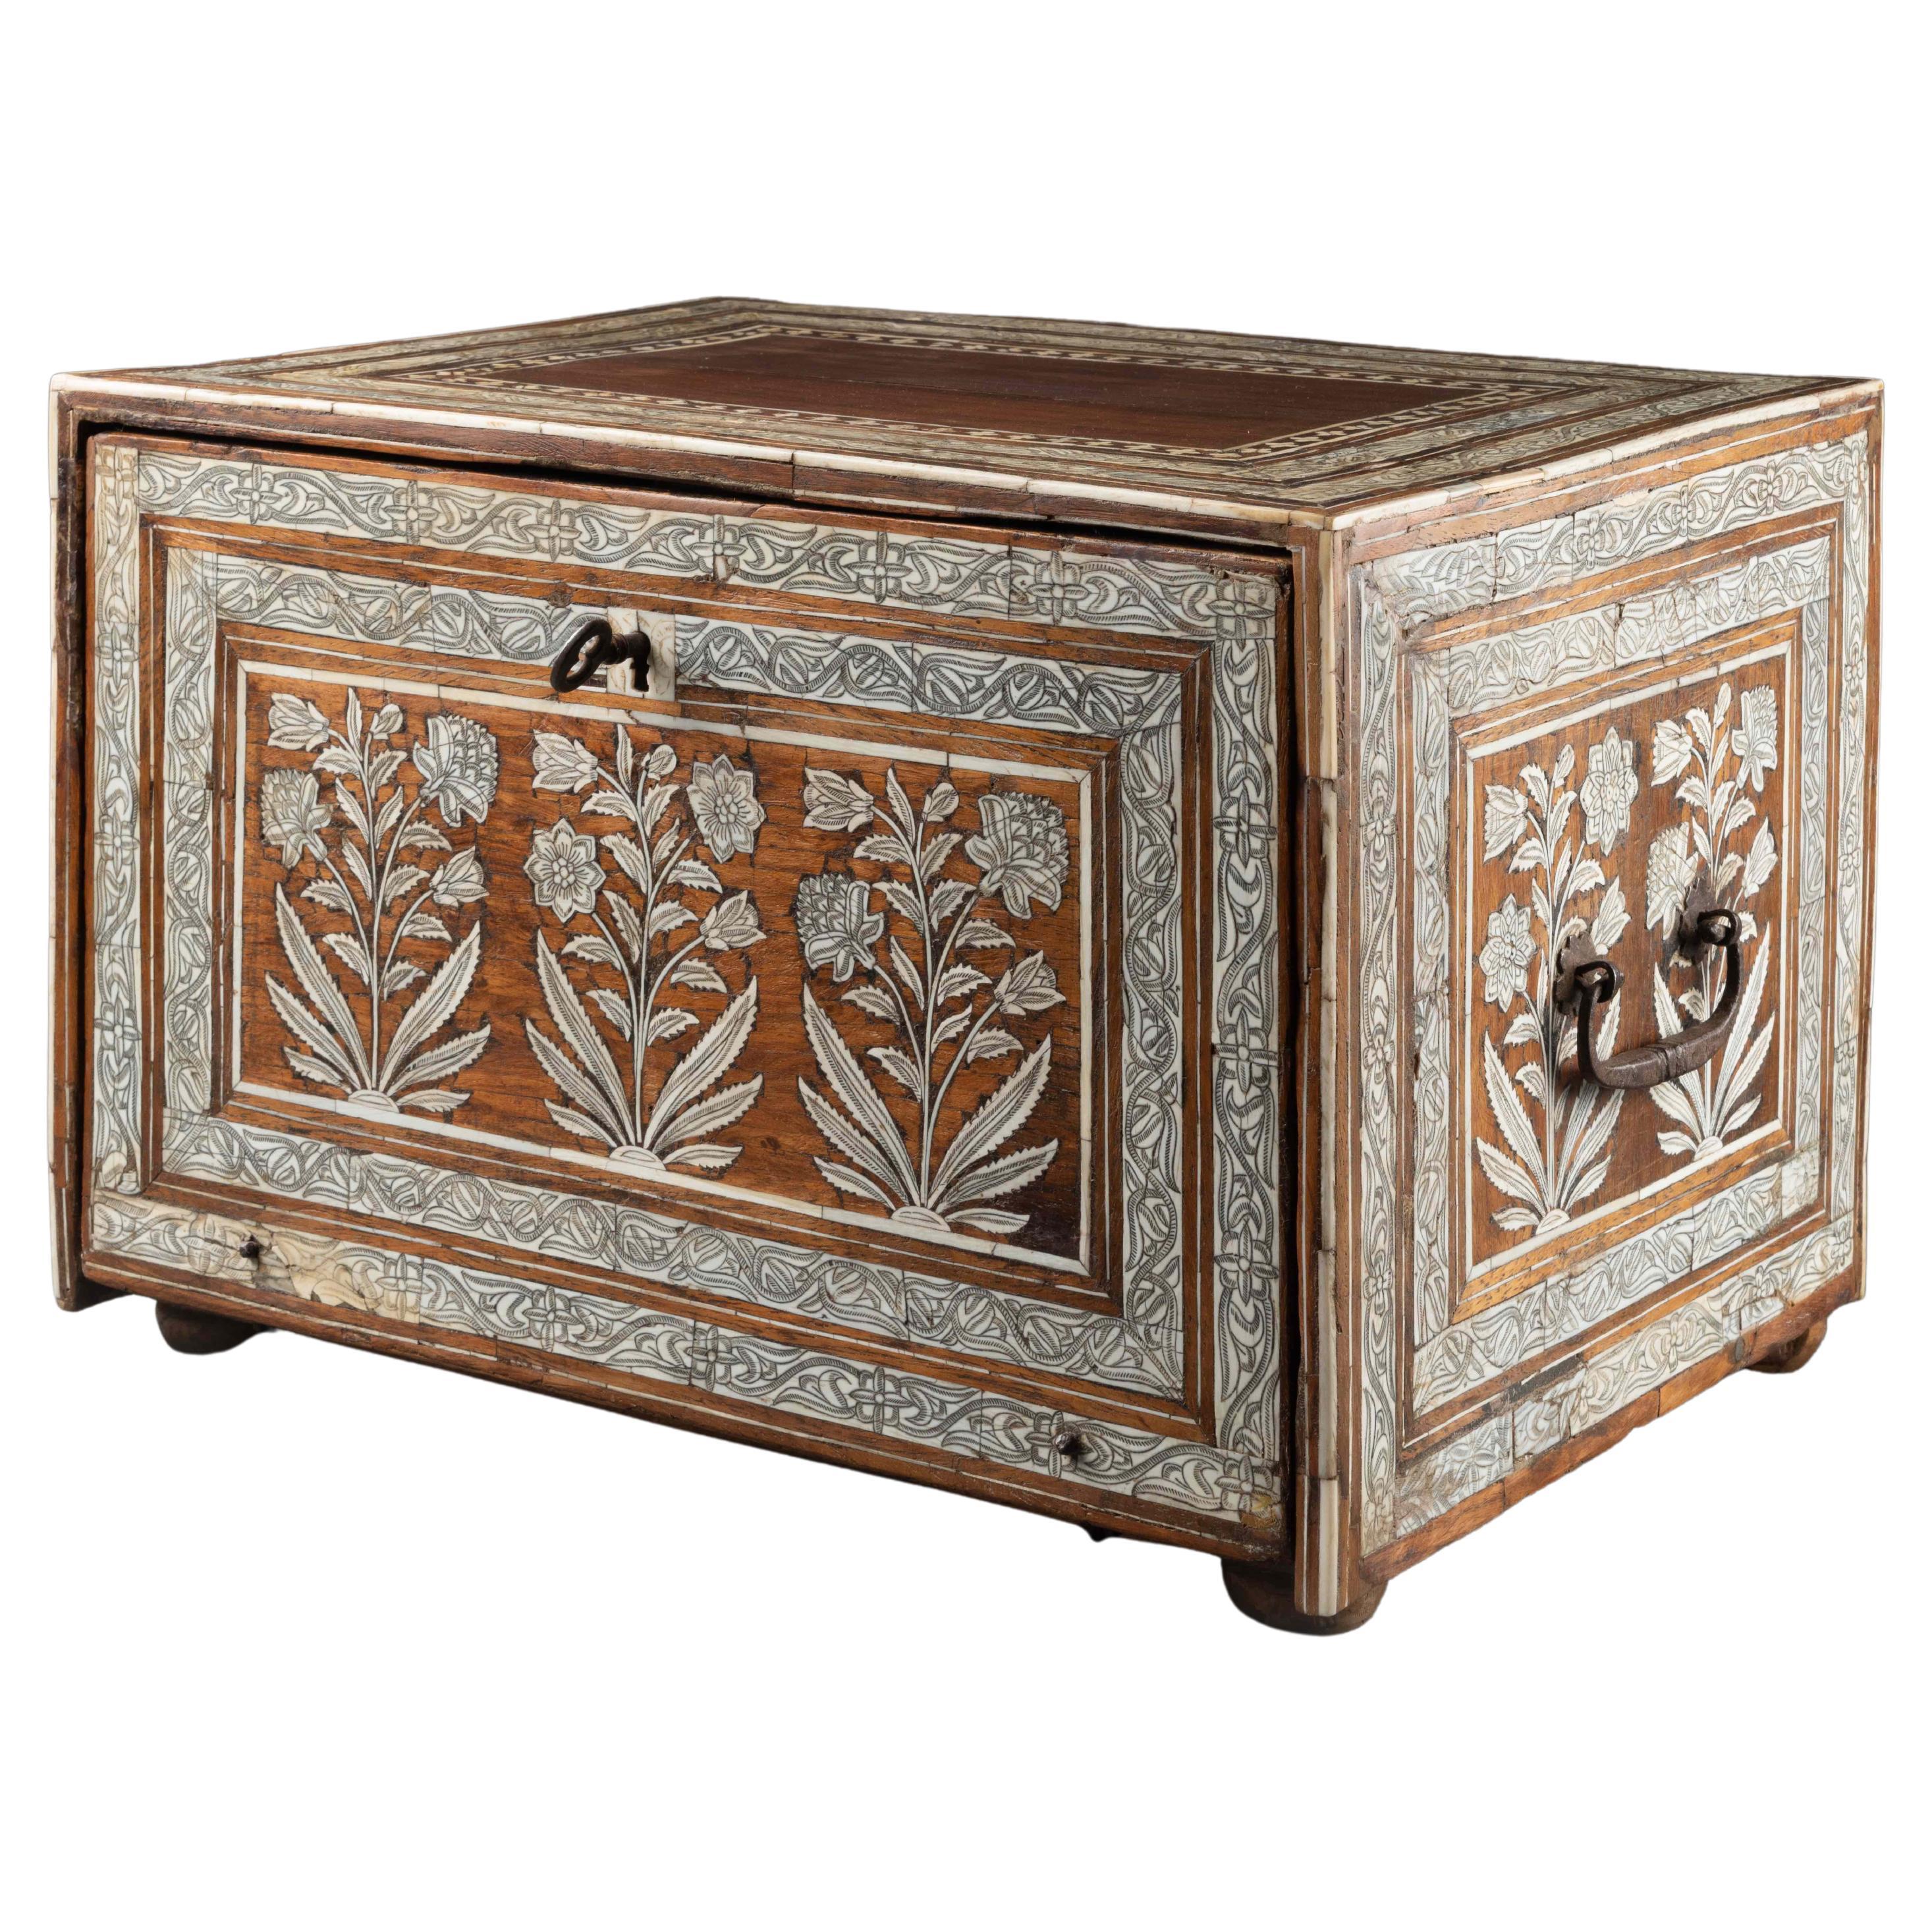 Mughal Ivory Inlaid Wood Cabinet, 17th Century For Sale